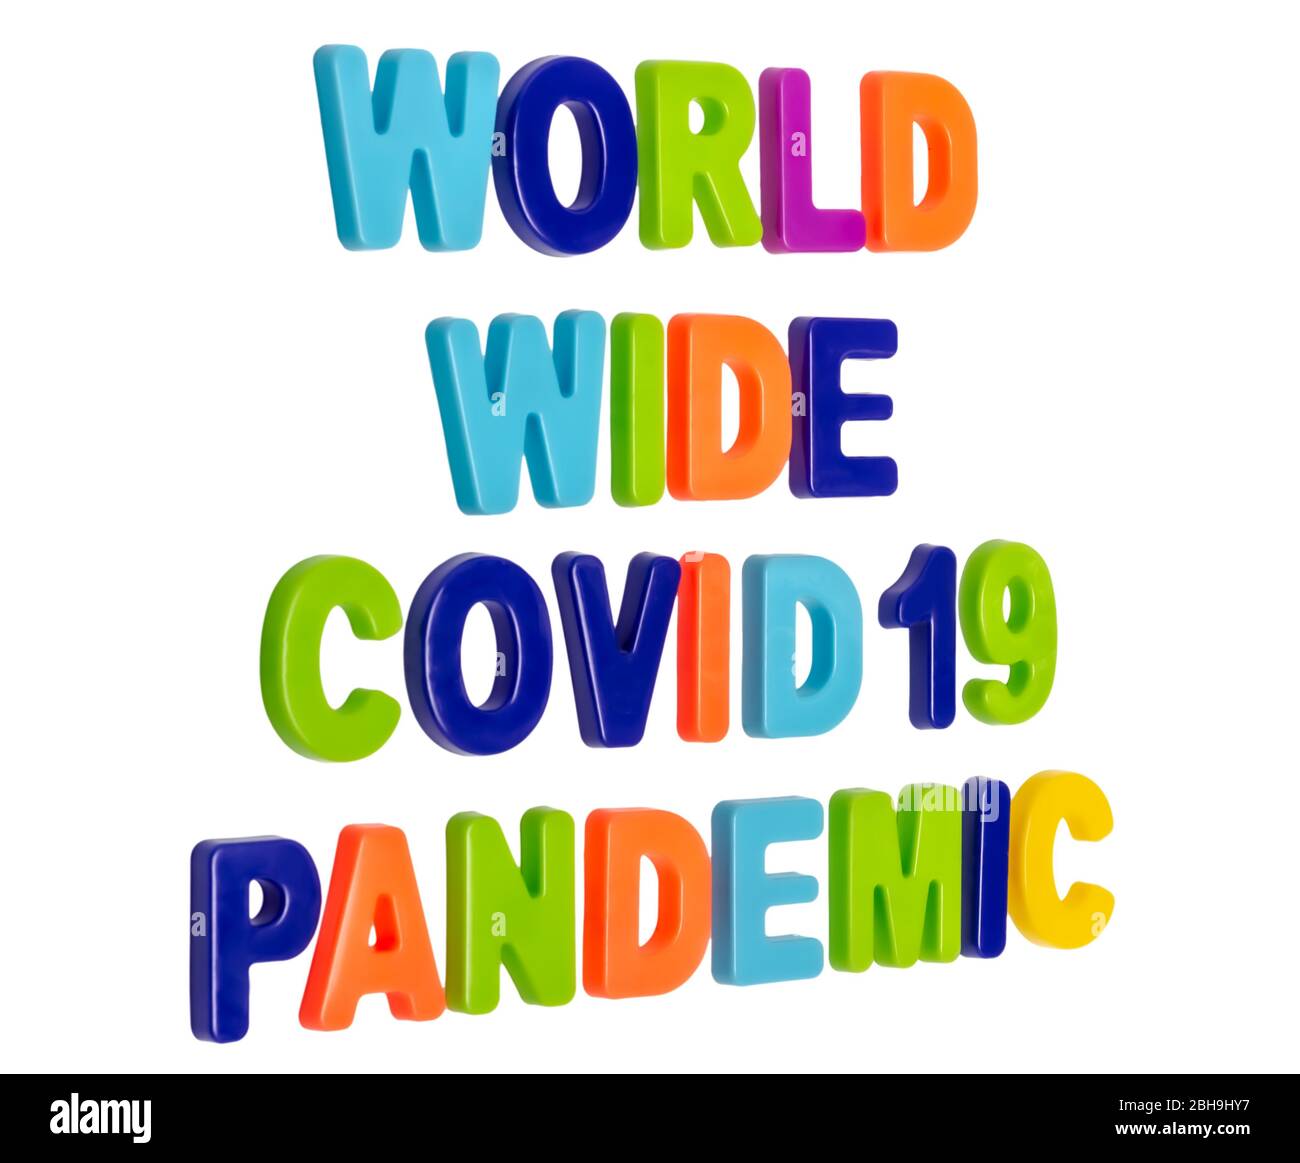 Coronavirus pandemic, text WORLD WIDE COVID-19 PANDEMIC on a white background. Worldwide pandemic. COVID-19 is the official new name for coronavirus d Stock Photo